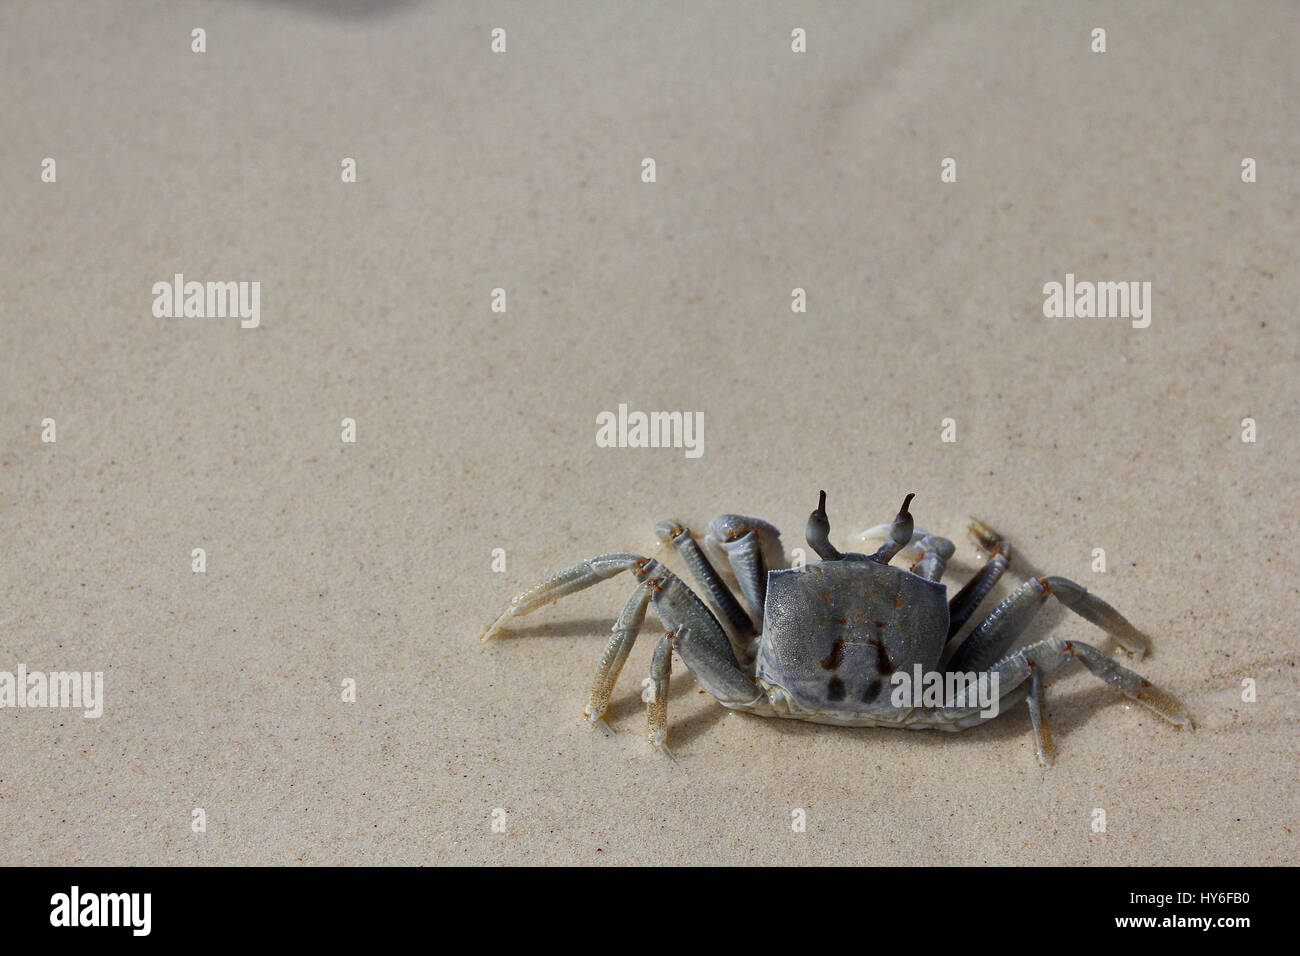 The crab from top View, on the white sand beach ,Thailand Stock Photo